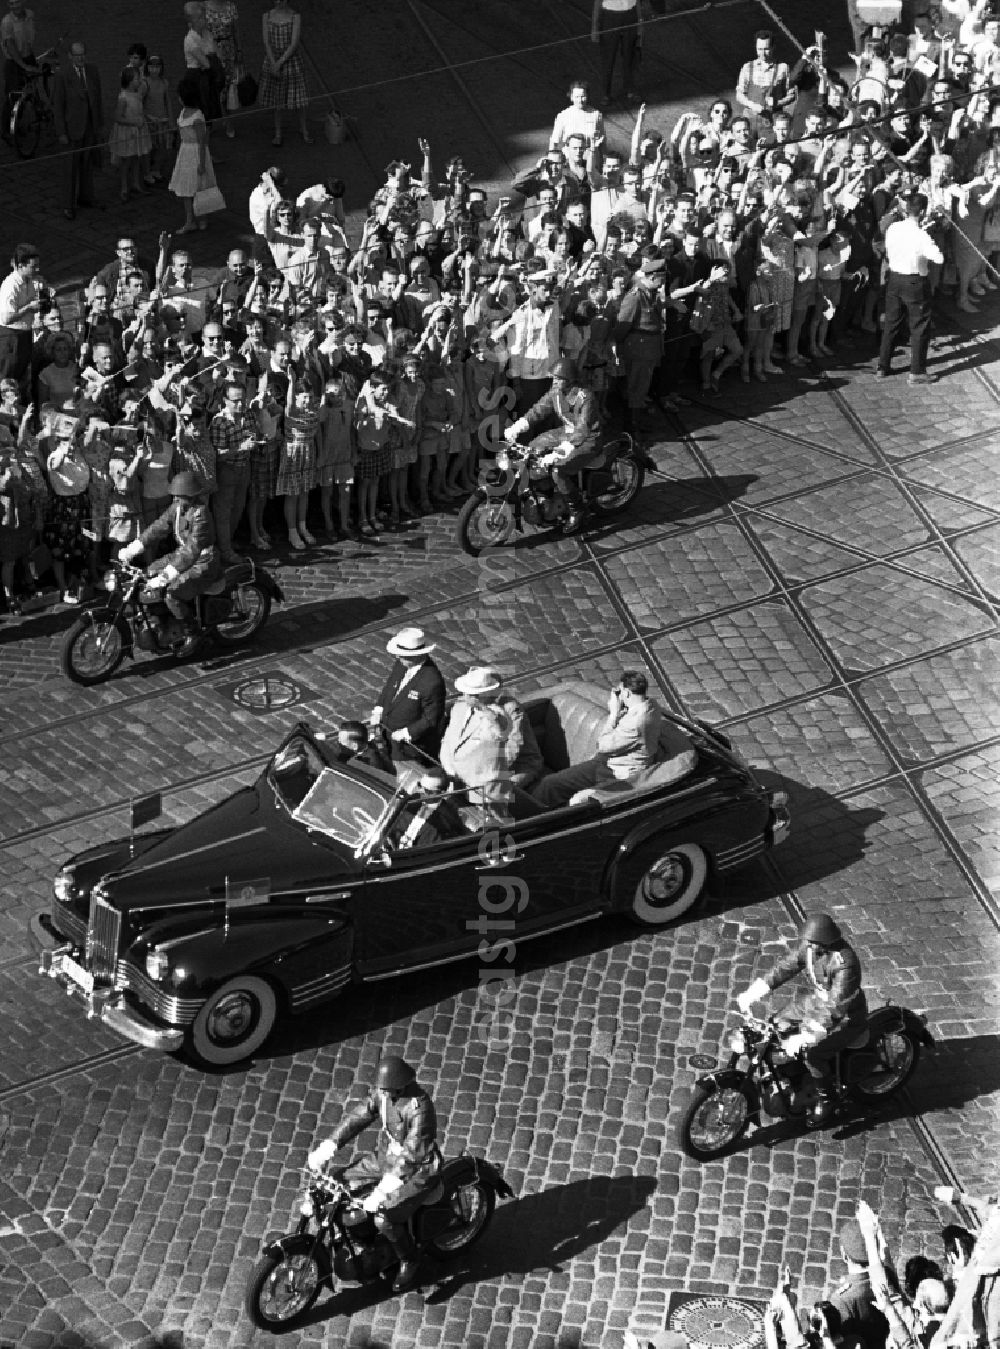 GDR picture archive: Berlin - State visit of the Soviet Prime Minister Nikita Khrushchev to Berlin in the territory of the former GDR, German Democratic Republic. Nikita Khrushchev and Walter Ulbricht drive past spectators together at Alexanderplatz